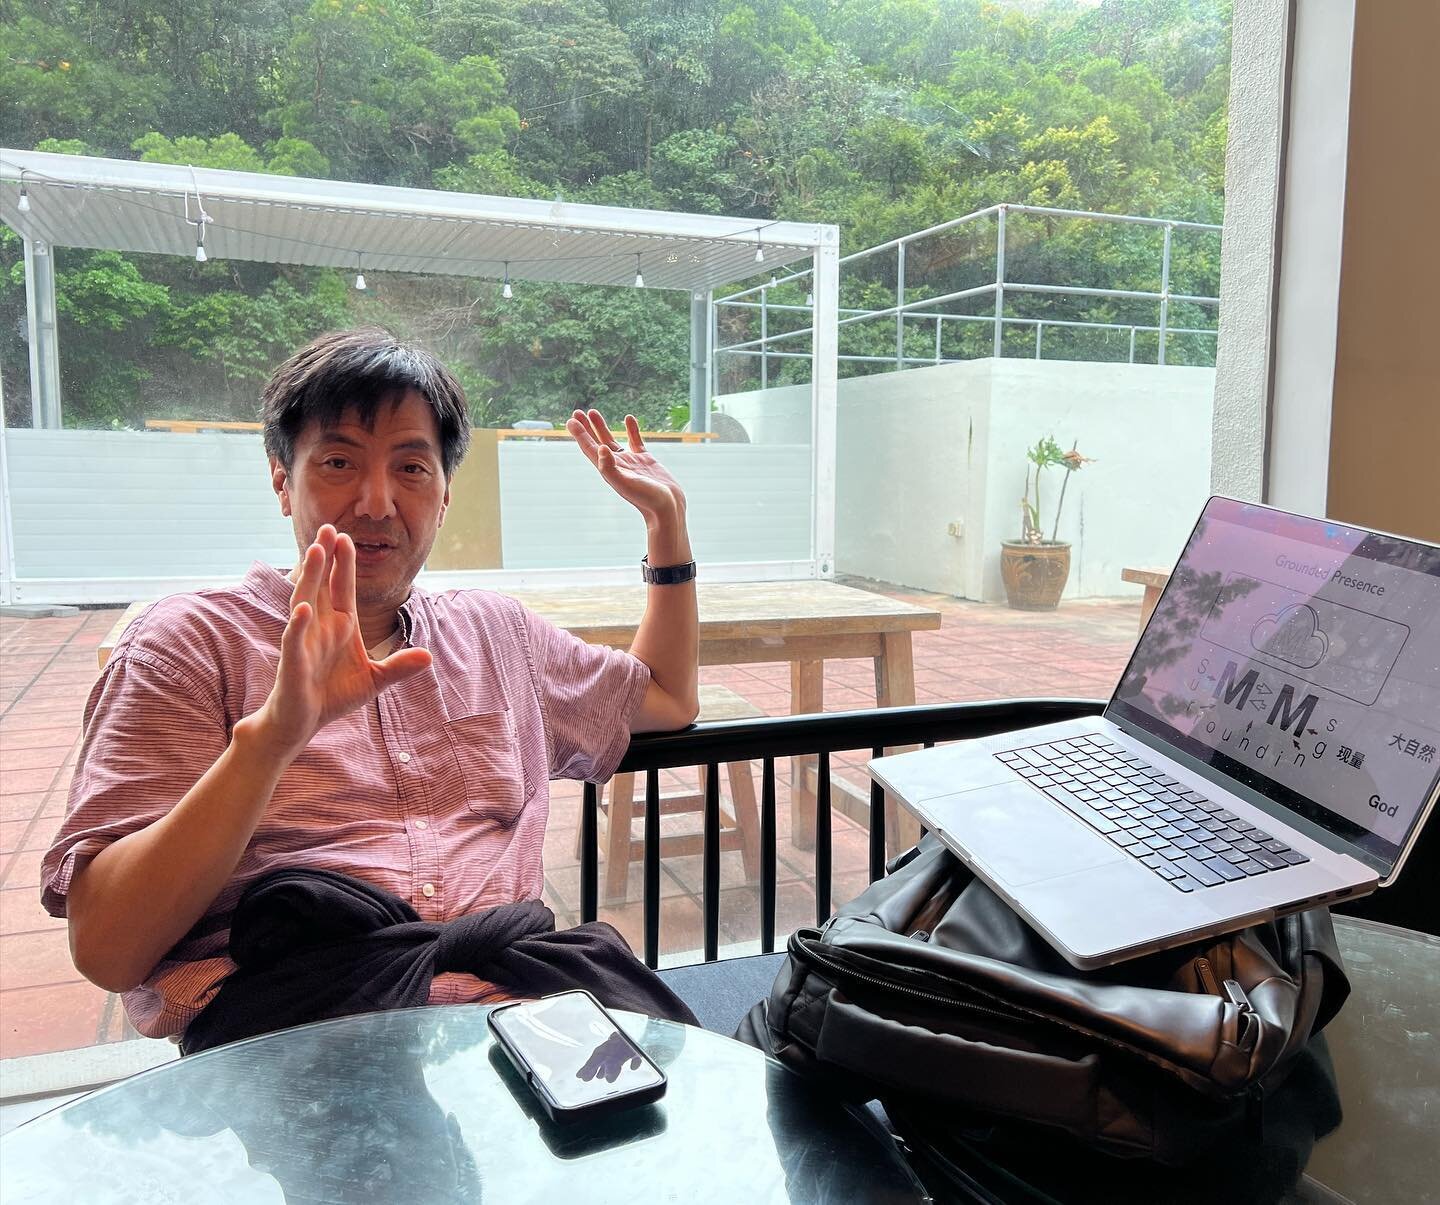 @phusikoi is a force of nature. A benevolent hurricane. 

While teaching creativity and design at PolyU Design school in Hong Kong he is also a super-connector bridging impossible people together and making impossible things happen globally.